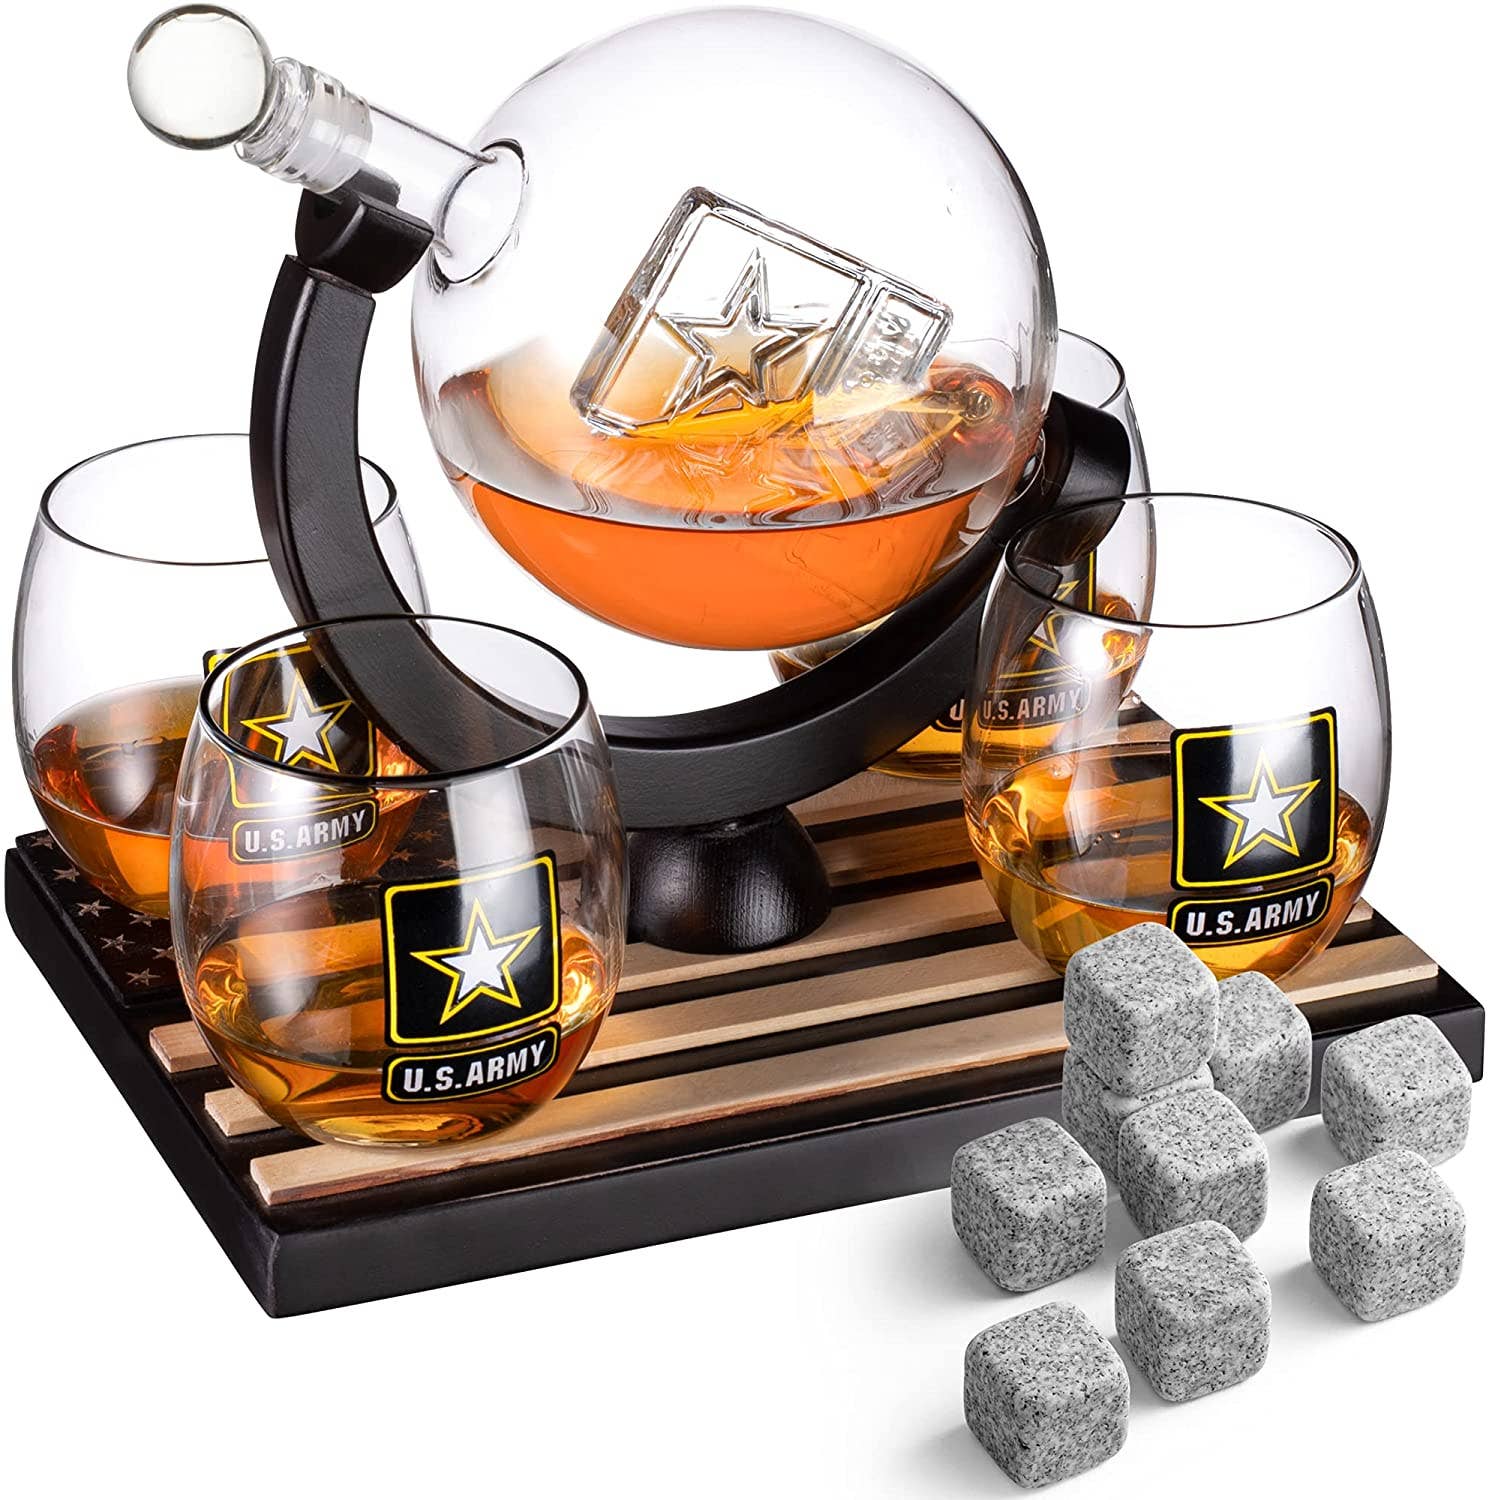 Globe Whiskey Decanter Set with 4 Liquor Glasses - US Army W